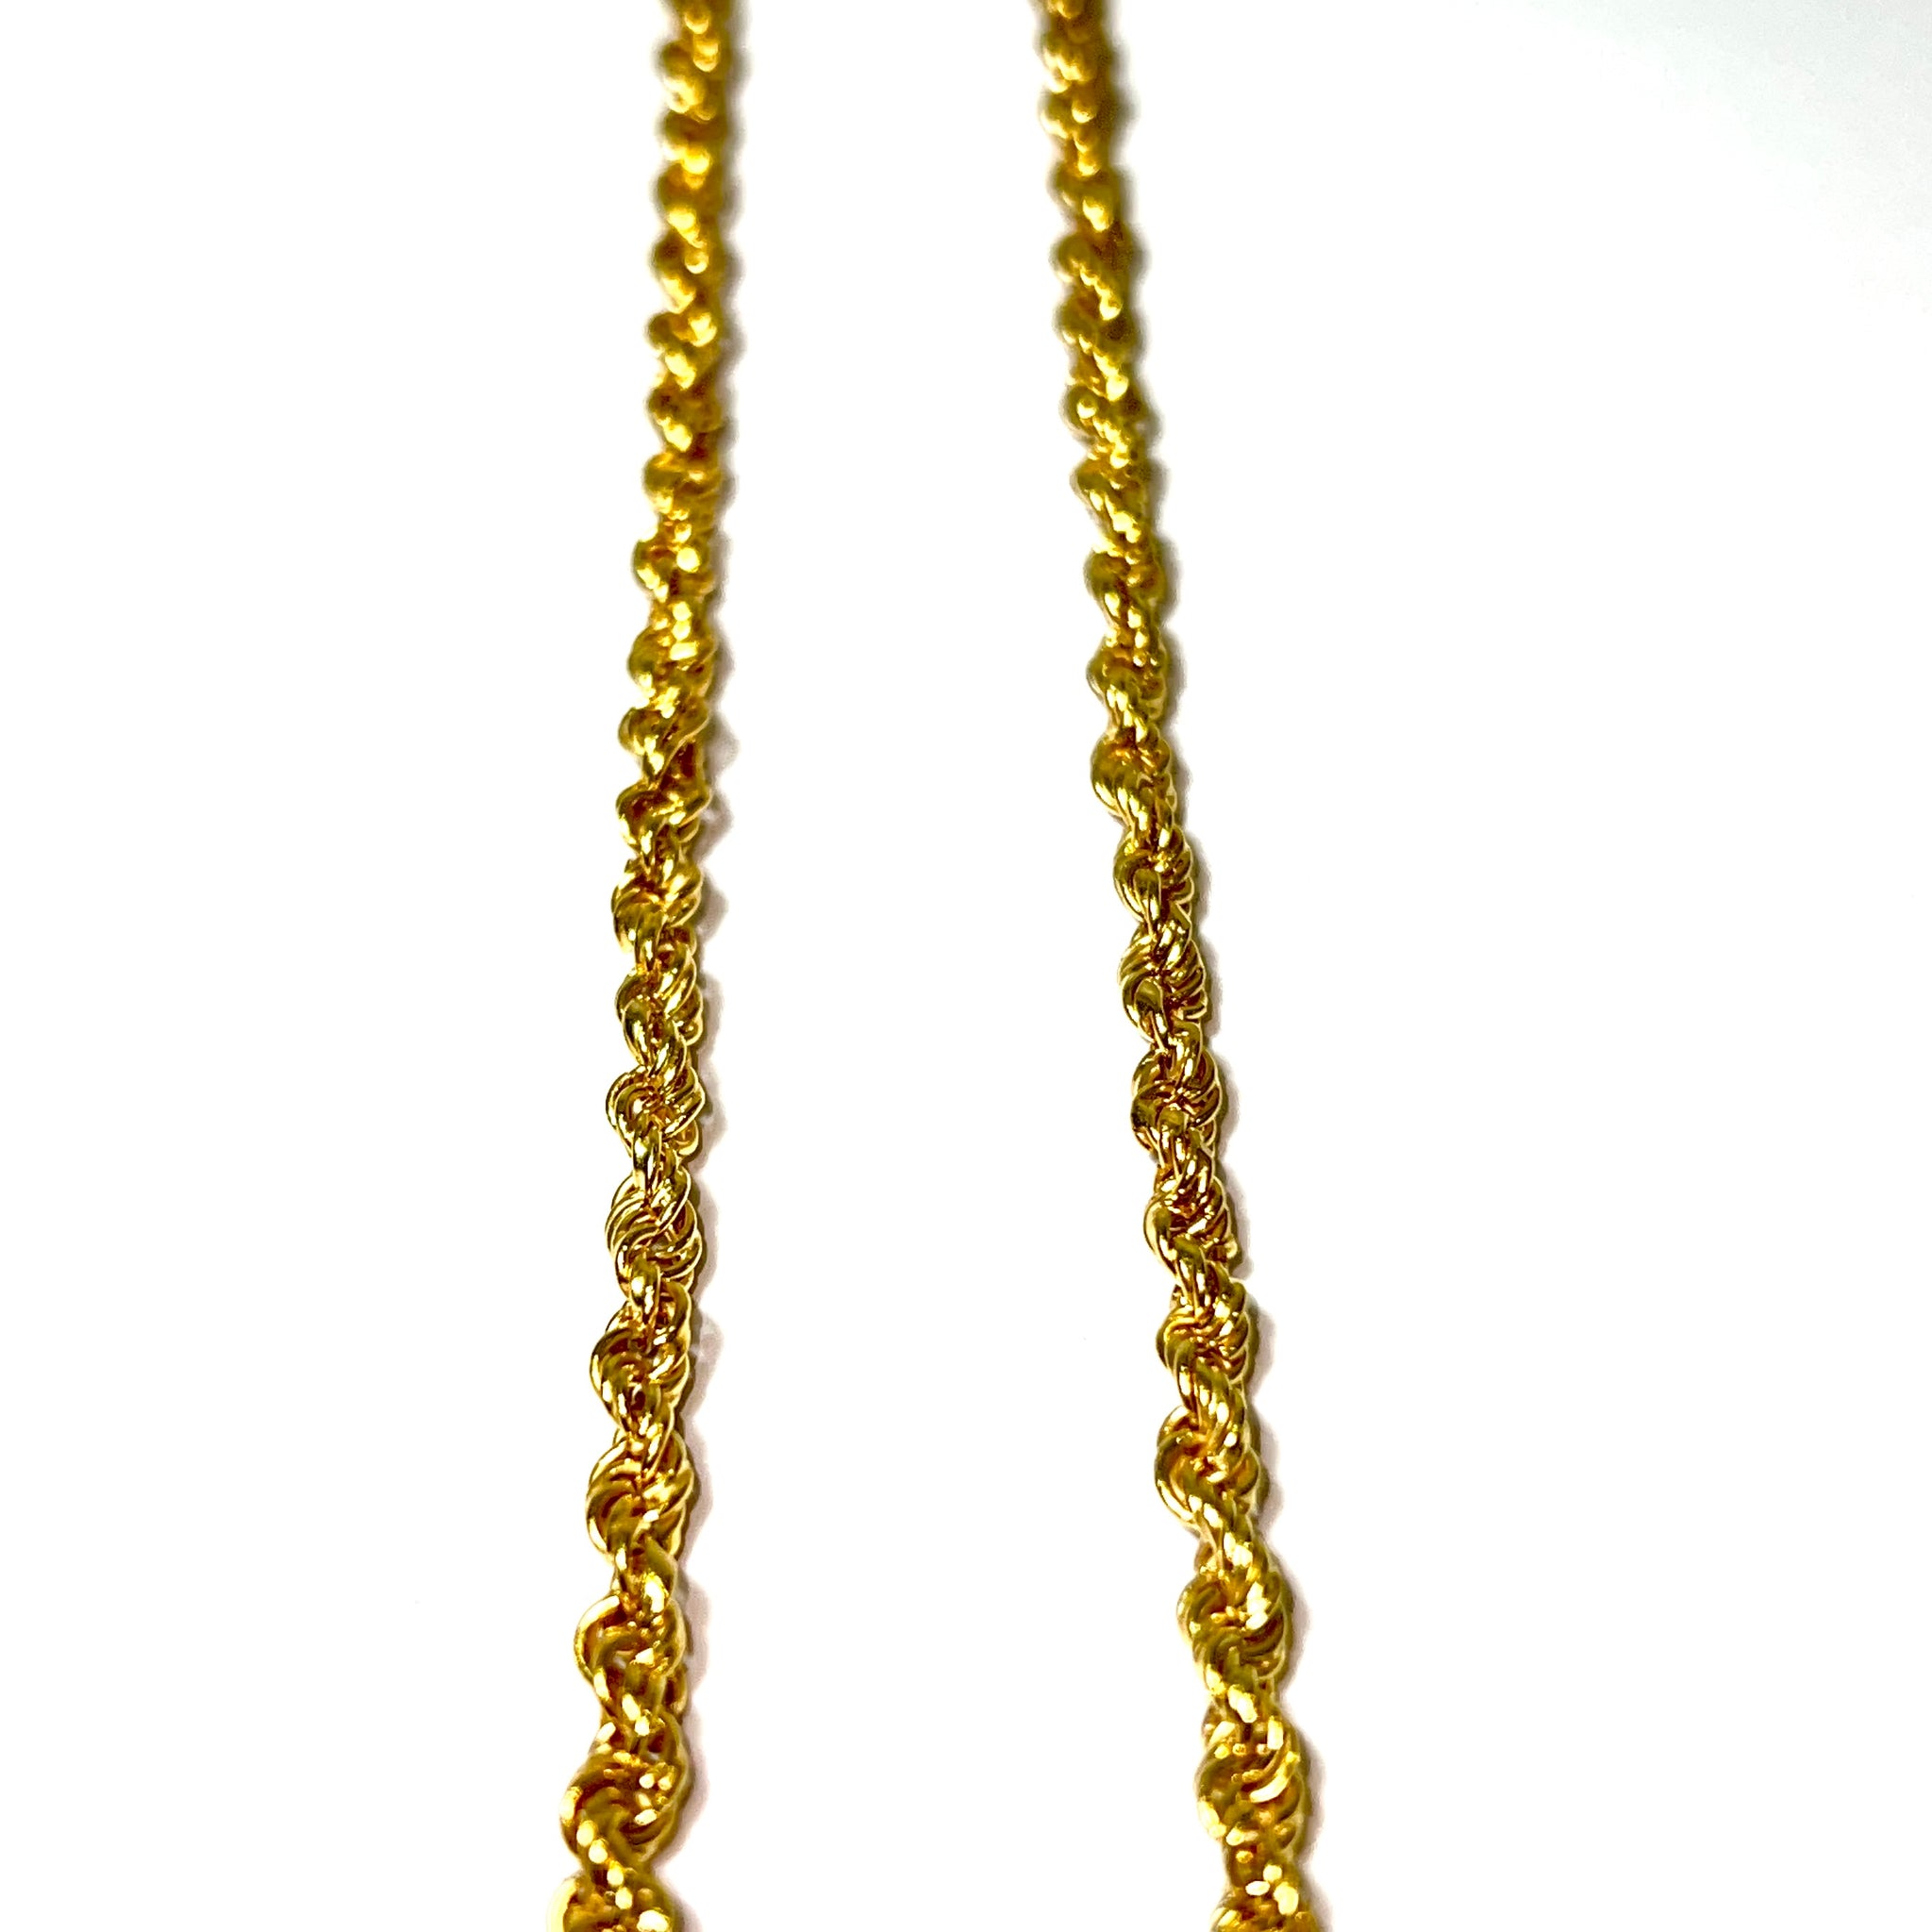 Solid Rope Chain - 14 Carat Gold - 63cm / 4mm - 449